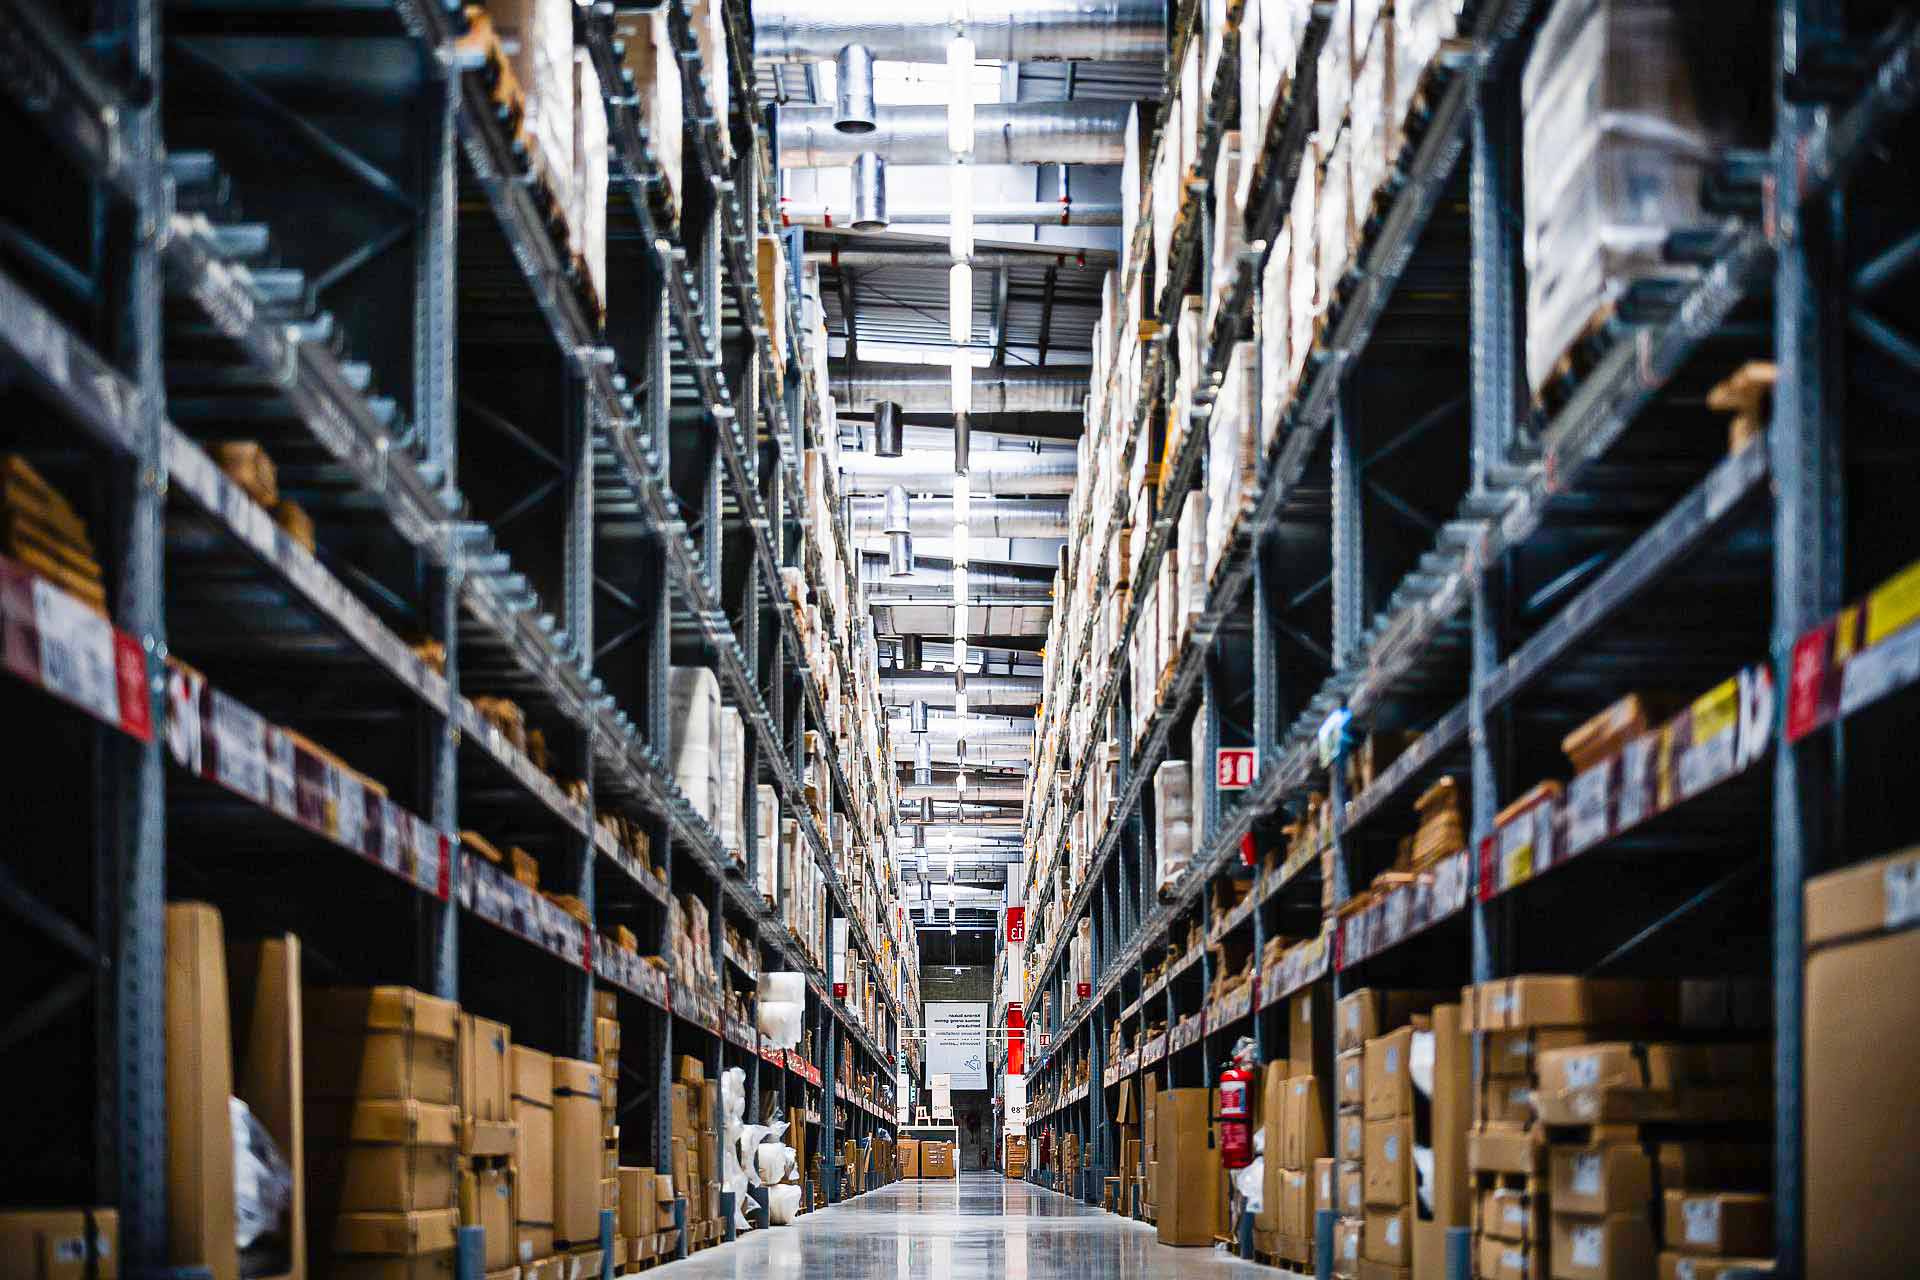 A large warehouse with aisles setup for picking activities